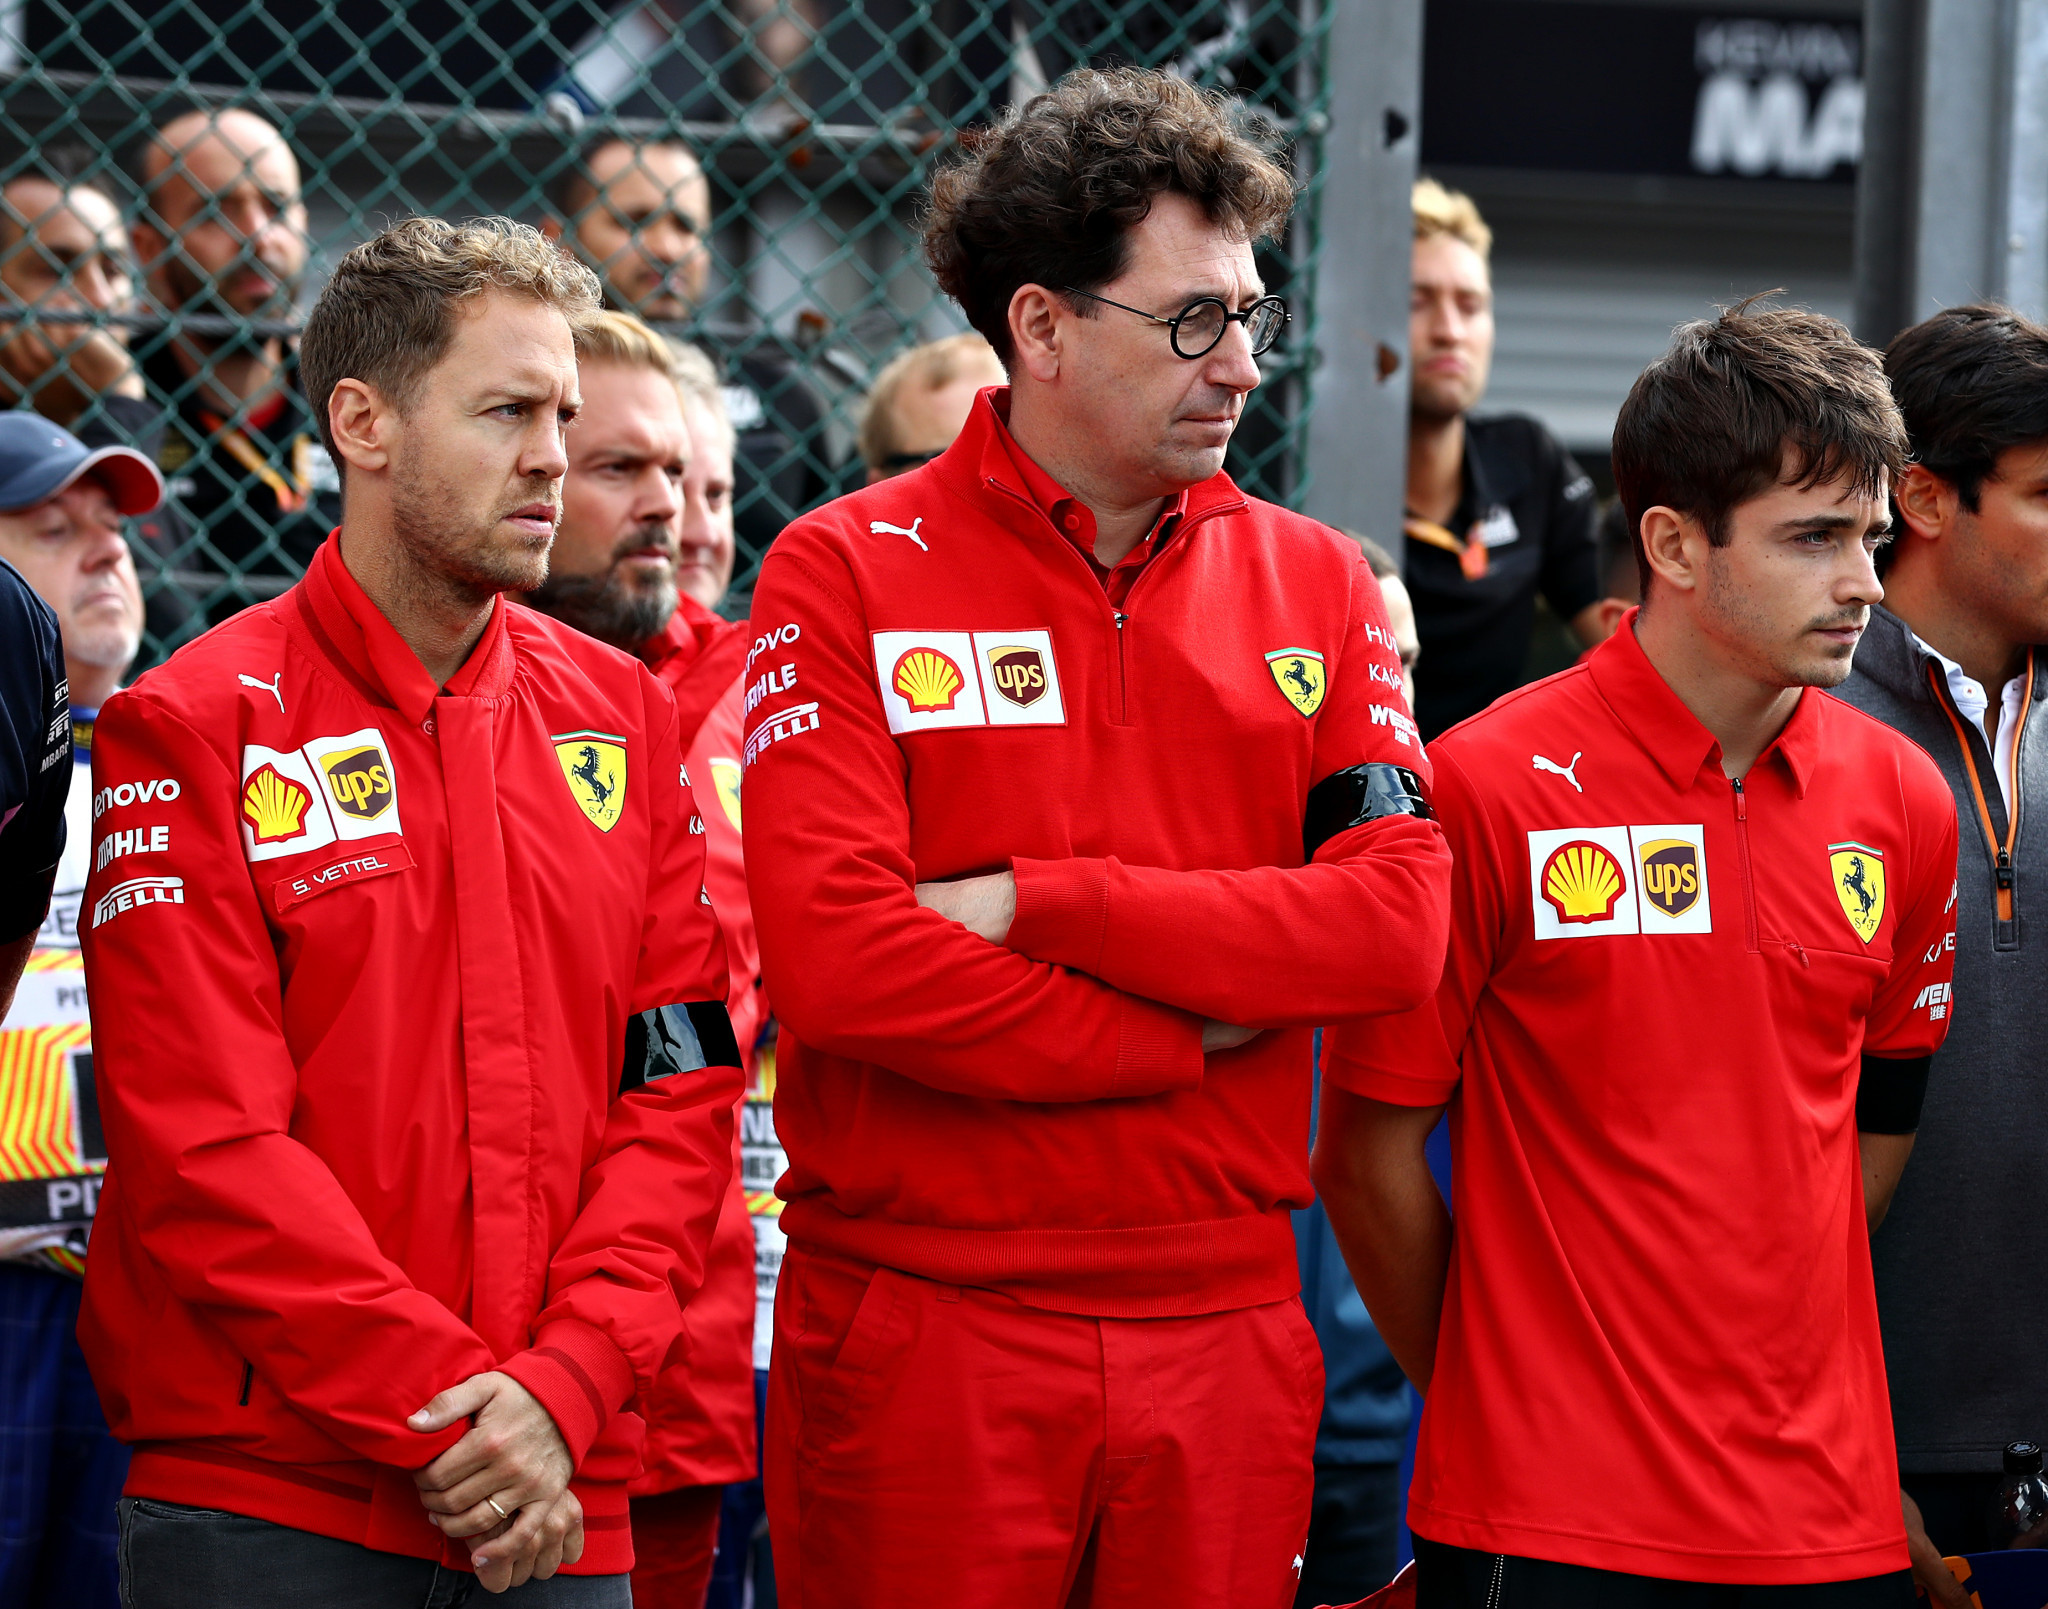 Mattia Binotto, centre, with his current Ferrari drivers, Sebastian Vettel and Charles Leclerc, represent the richest team on the grid ©Getty Images